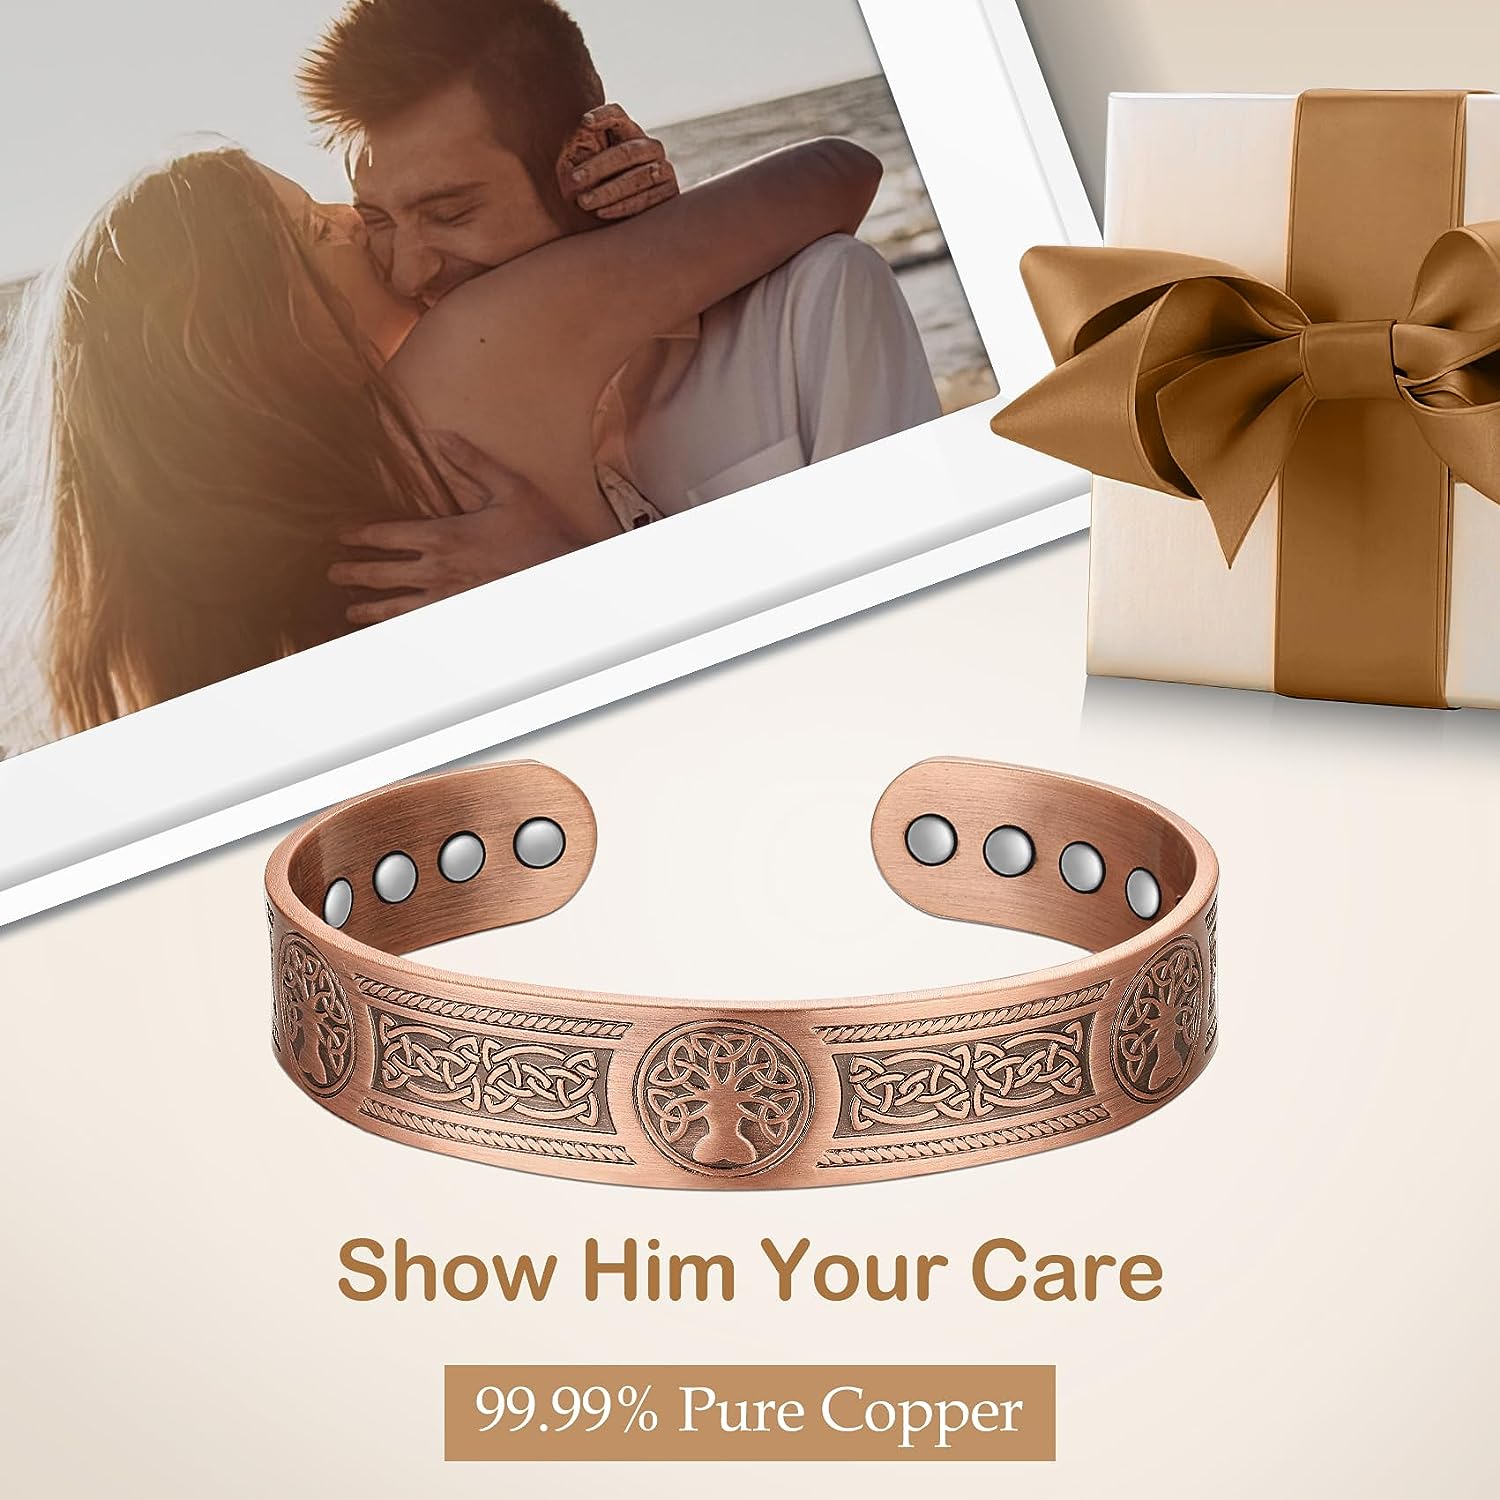 Personalized Design Elements of Magnetic Therapy Jewelry and Health Bracelets